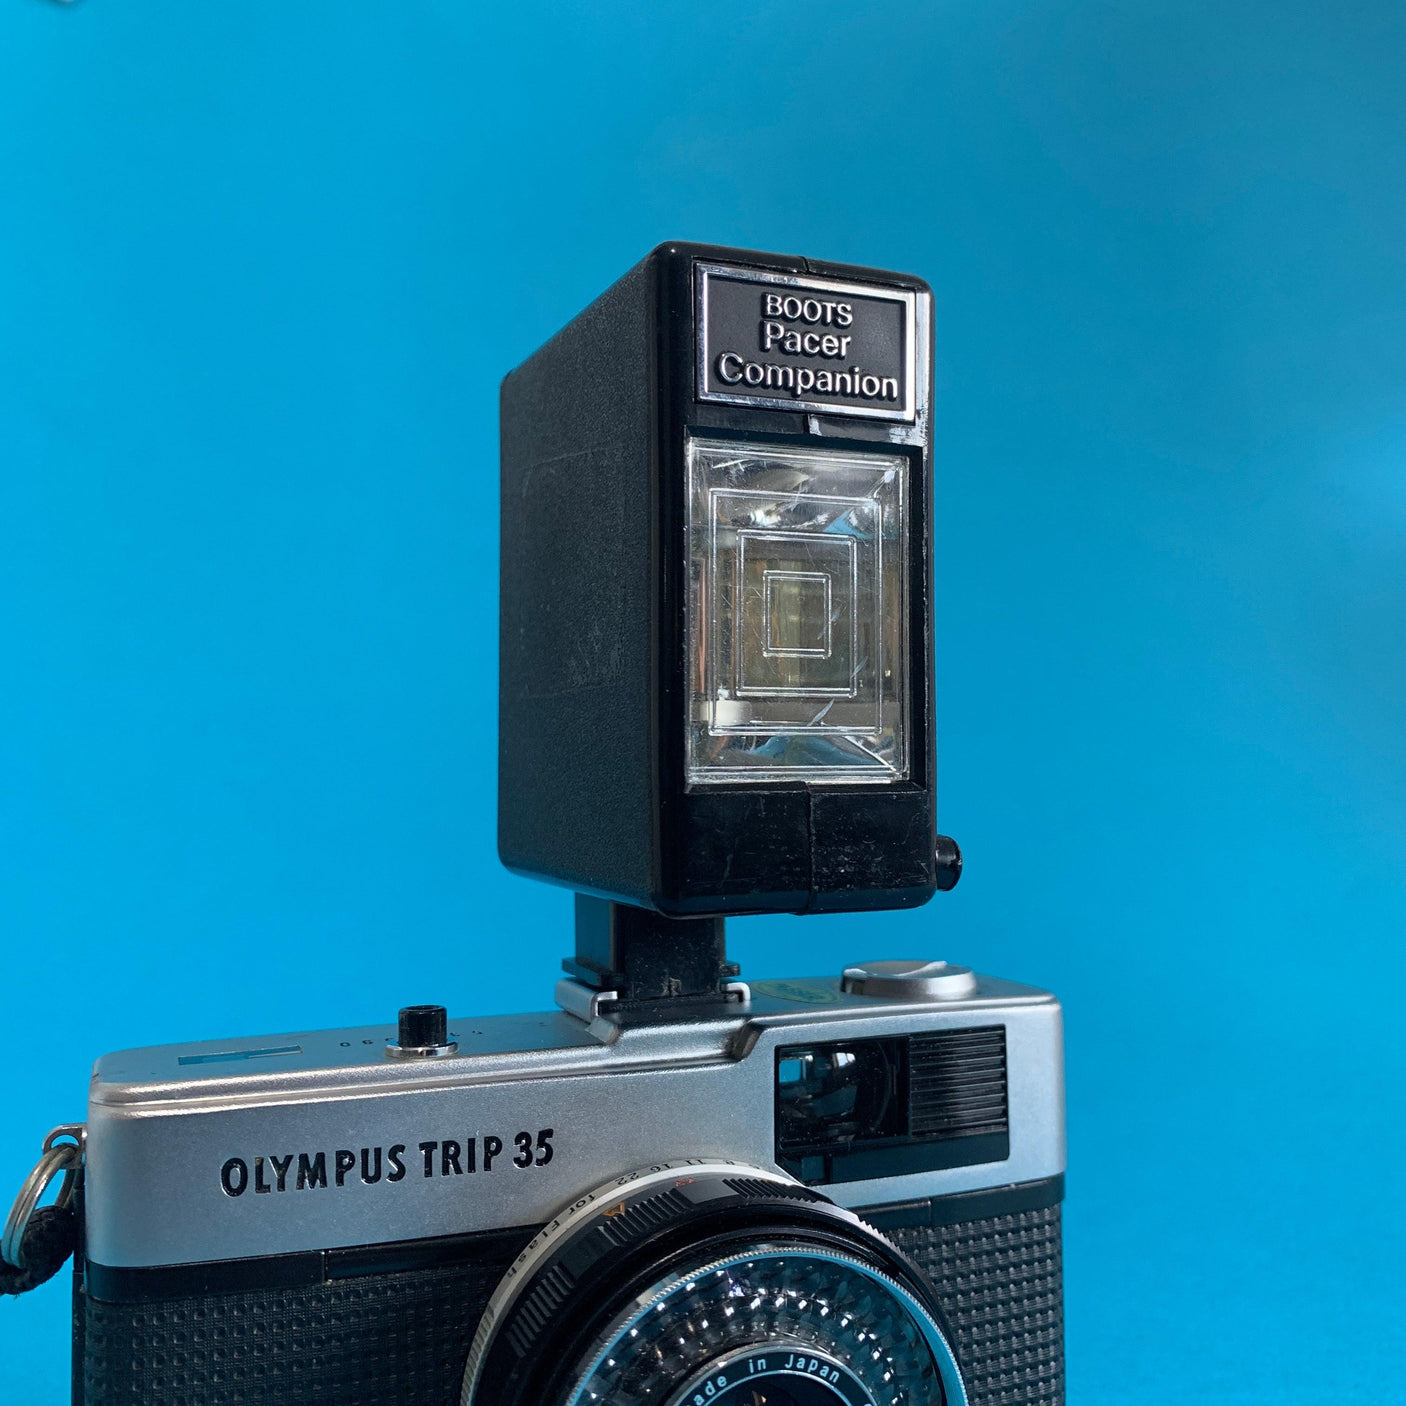 Compact External Flash Unit for 35mm Film Camera